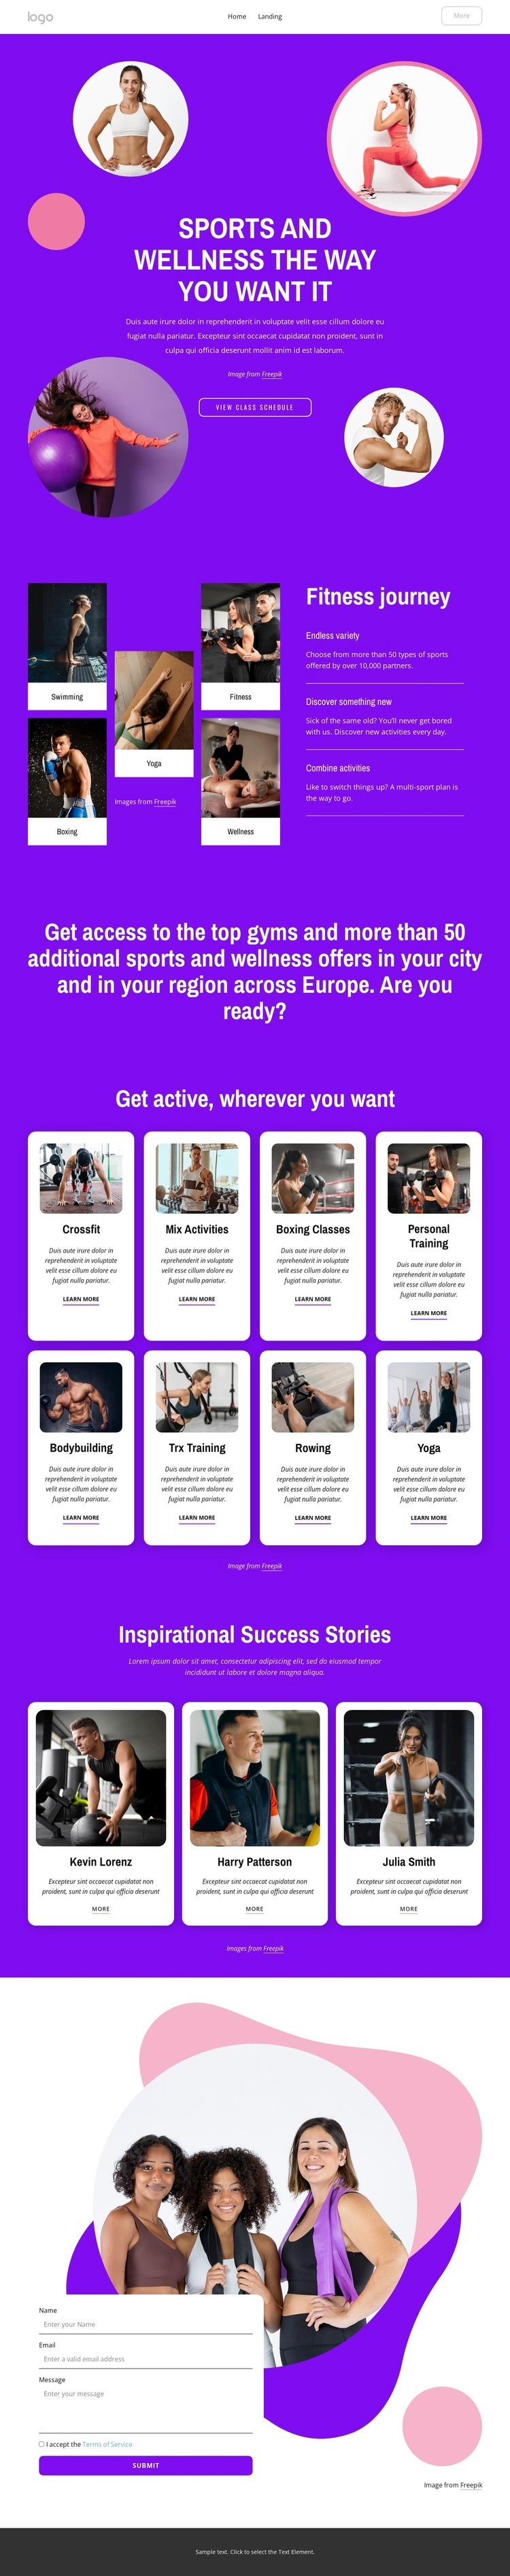 Sports and wellness the way you want it Homepage Design